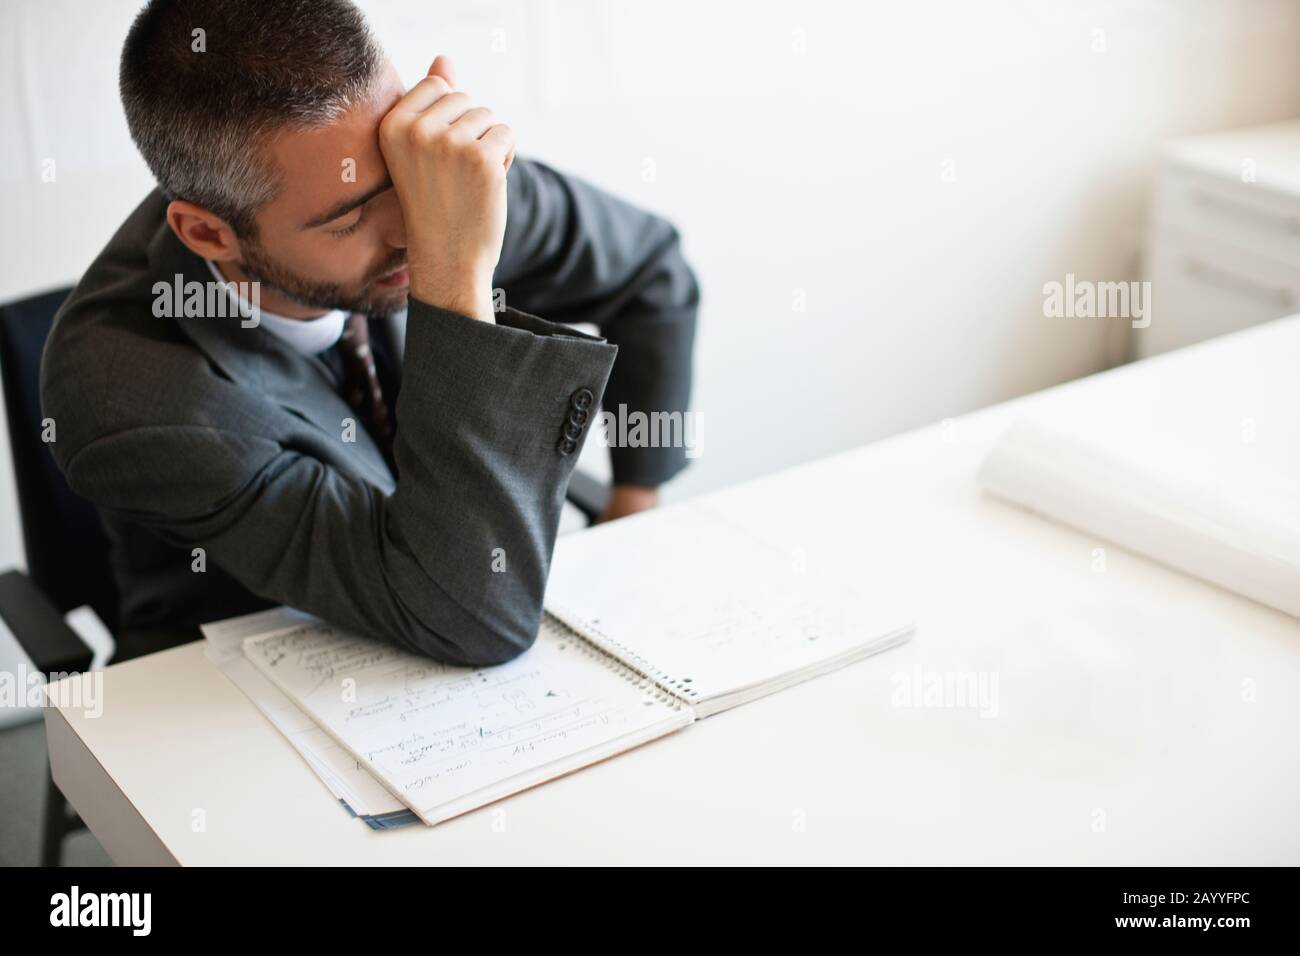 Businessman sits looking stressed with hand to face. Stock Photo